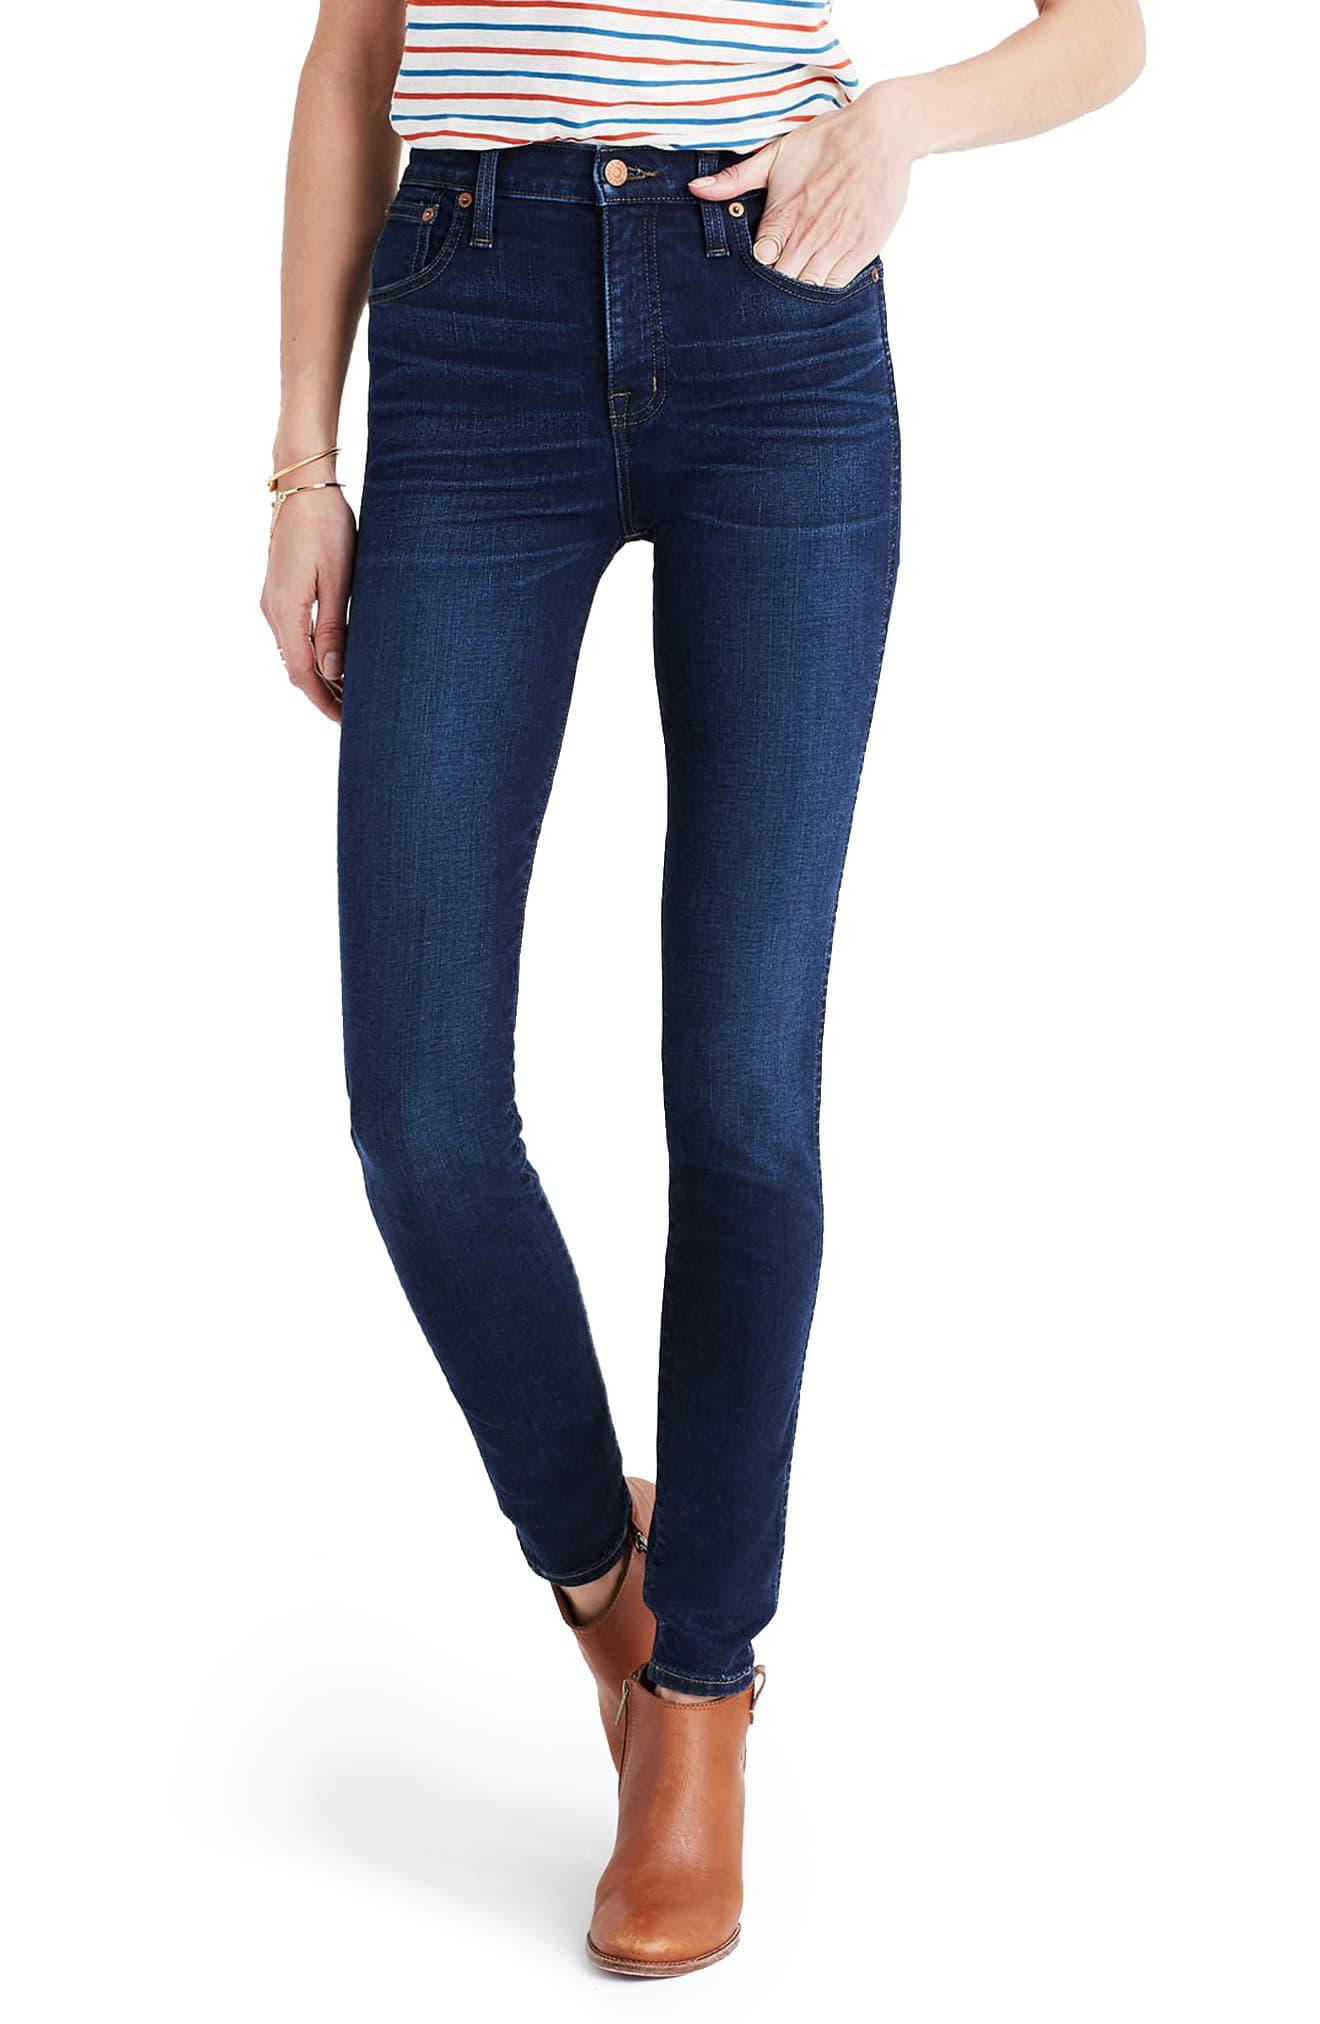 Madewell Denim 10-inch High Rise Skinny Jeans in Blue - Save 60% - Lyst